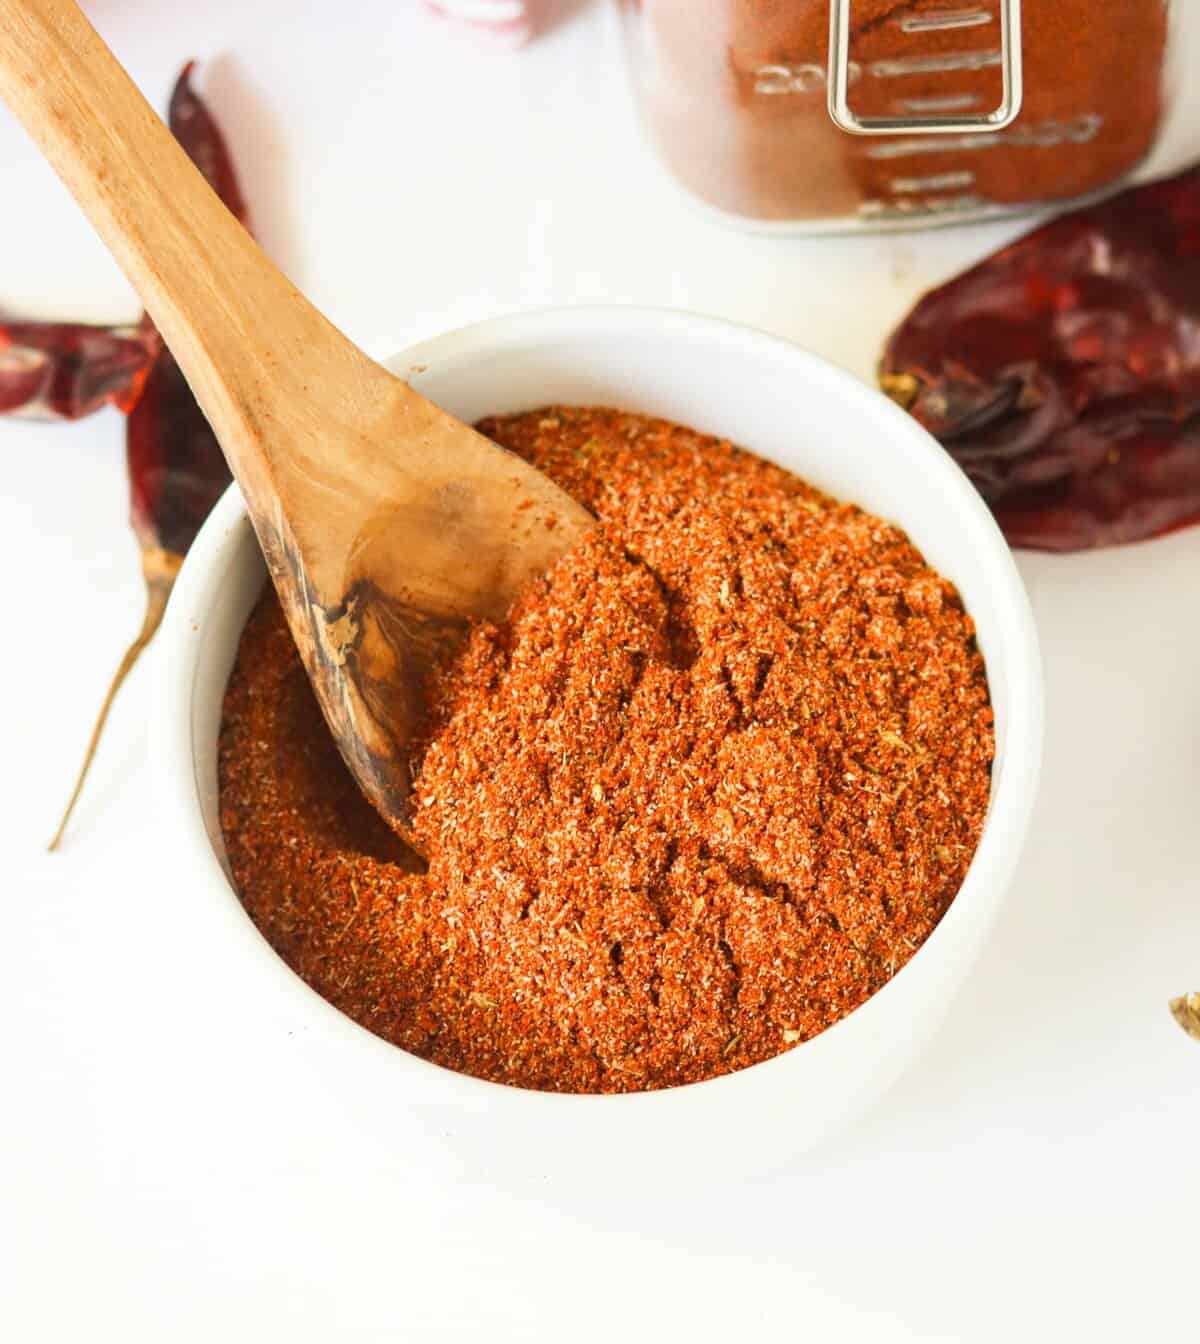 With or without salt, this chili powder recipe is as versatile as it gets